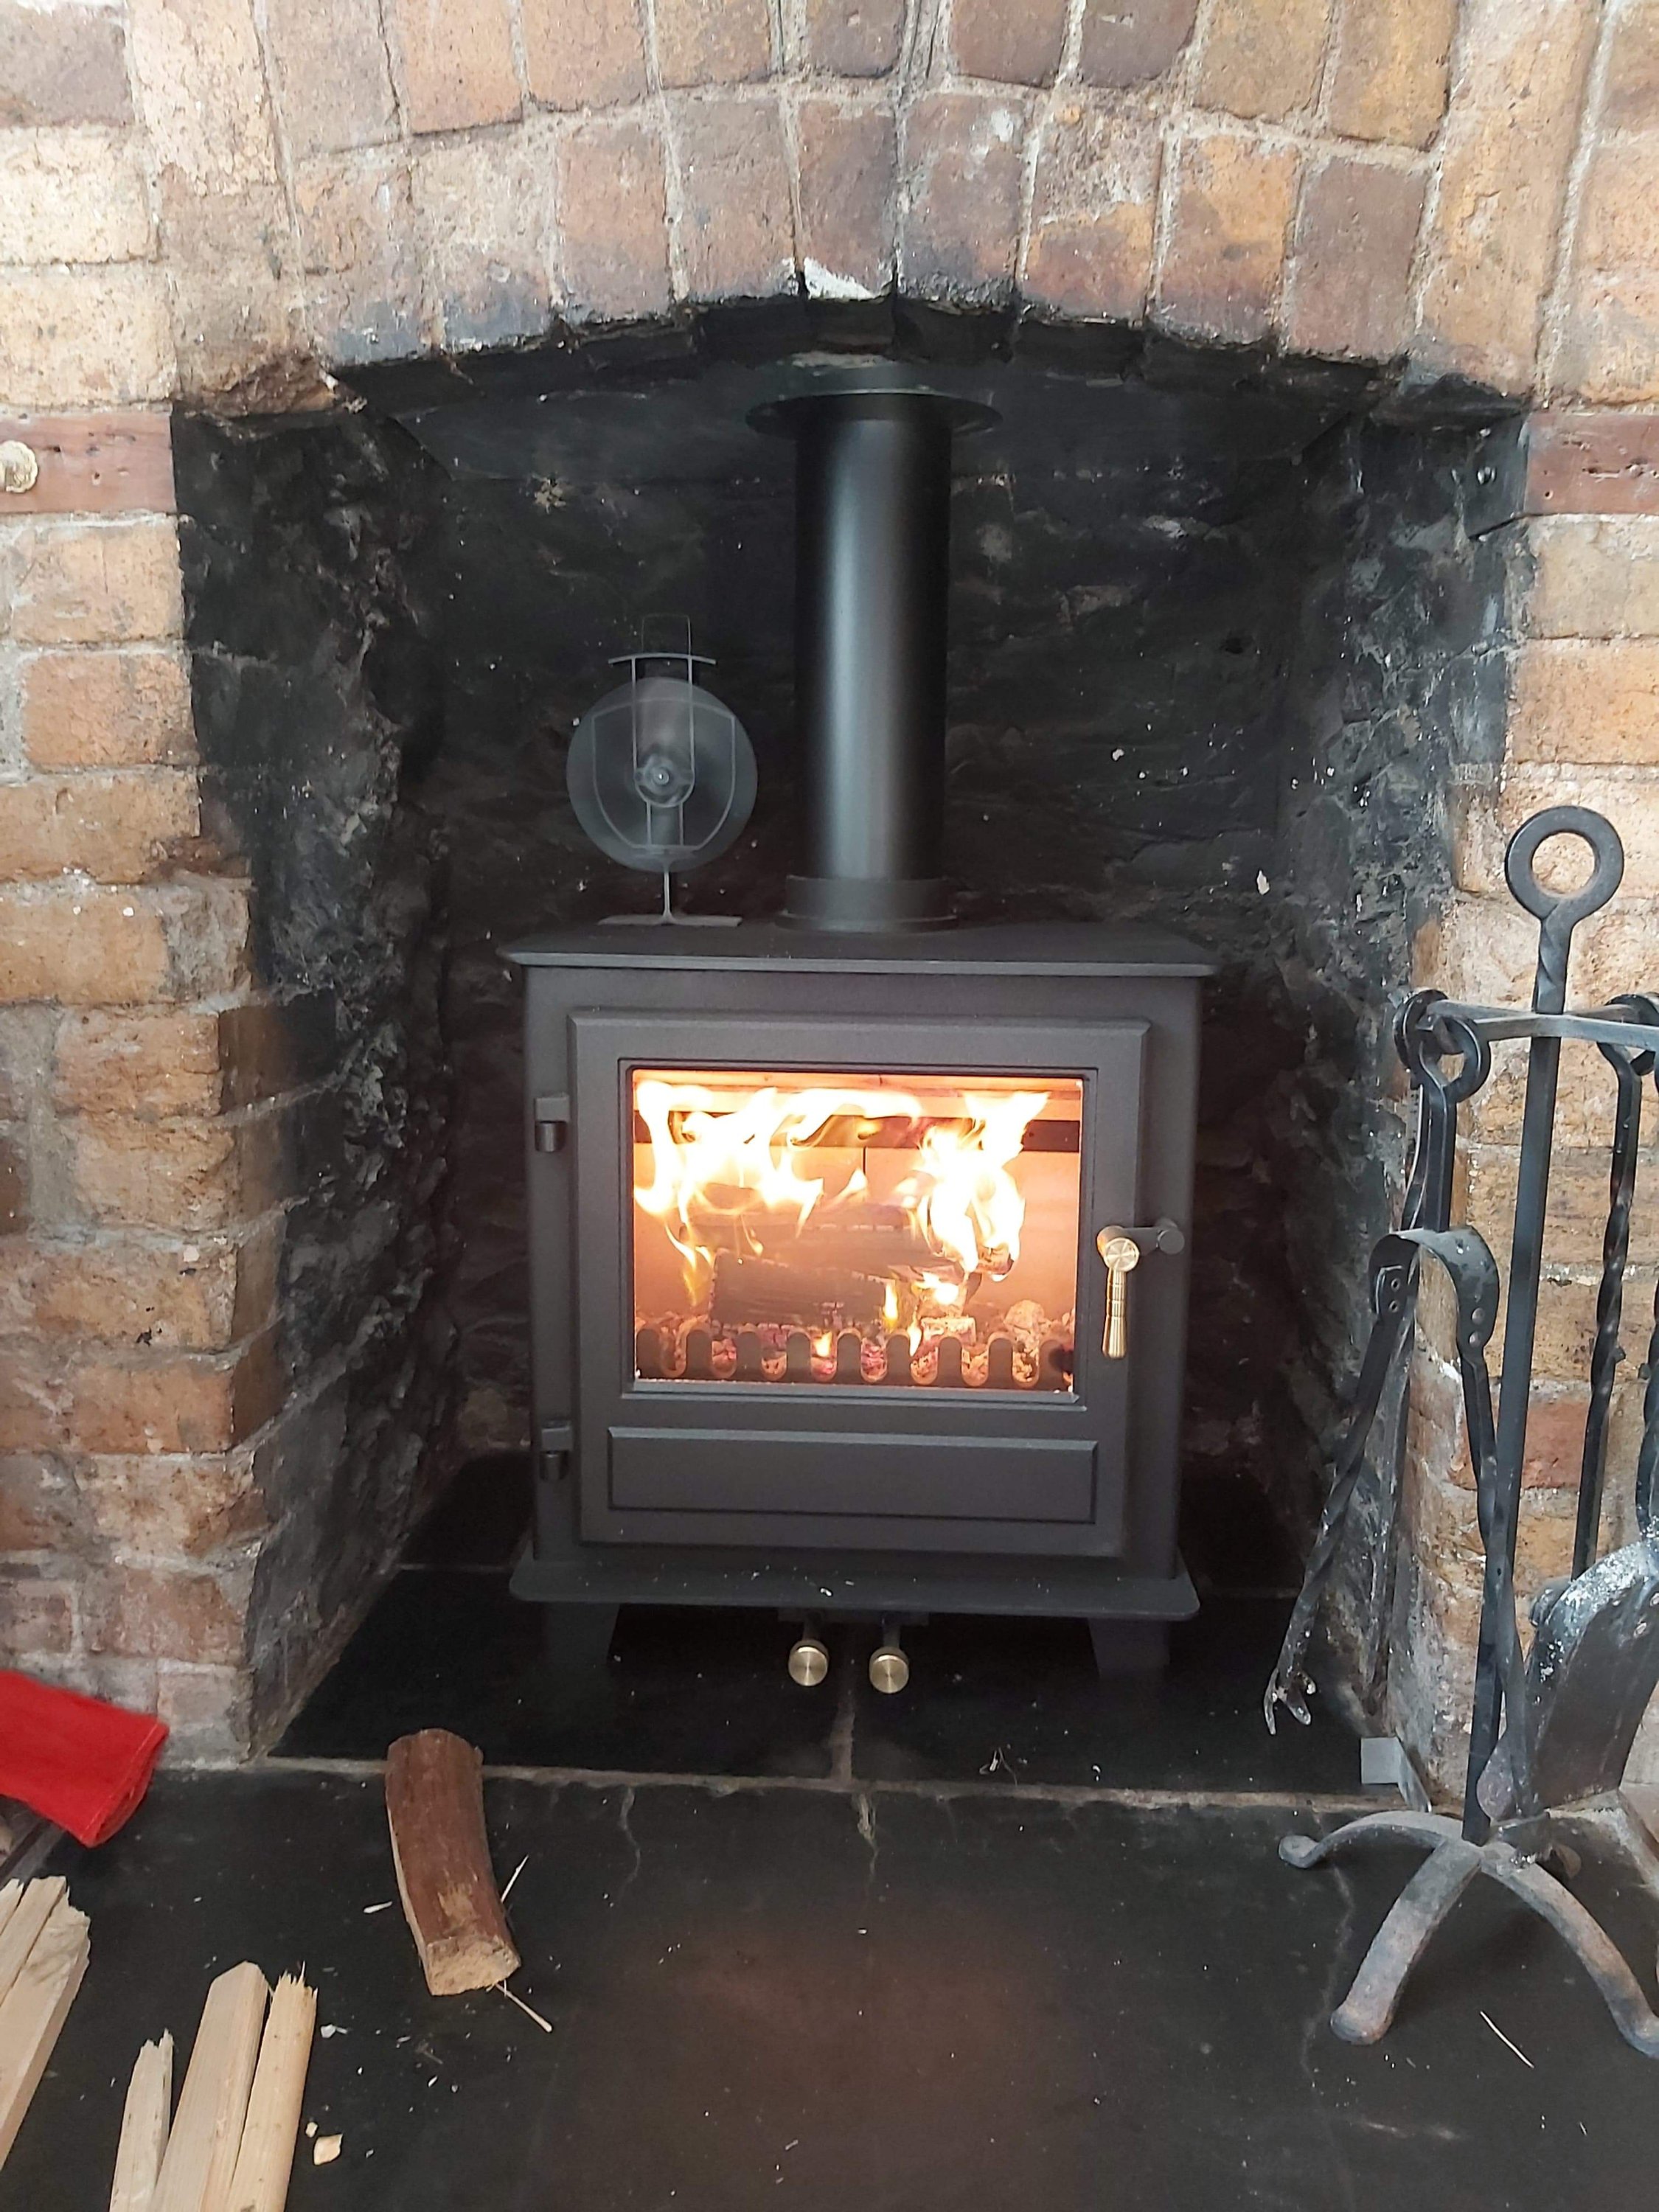 Clock Blirhfield 5 installed by our friends Harbour Stoves in Ivybridge